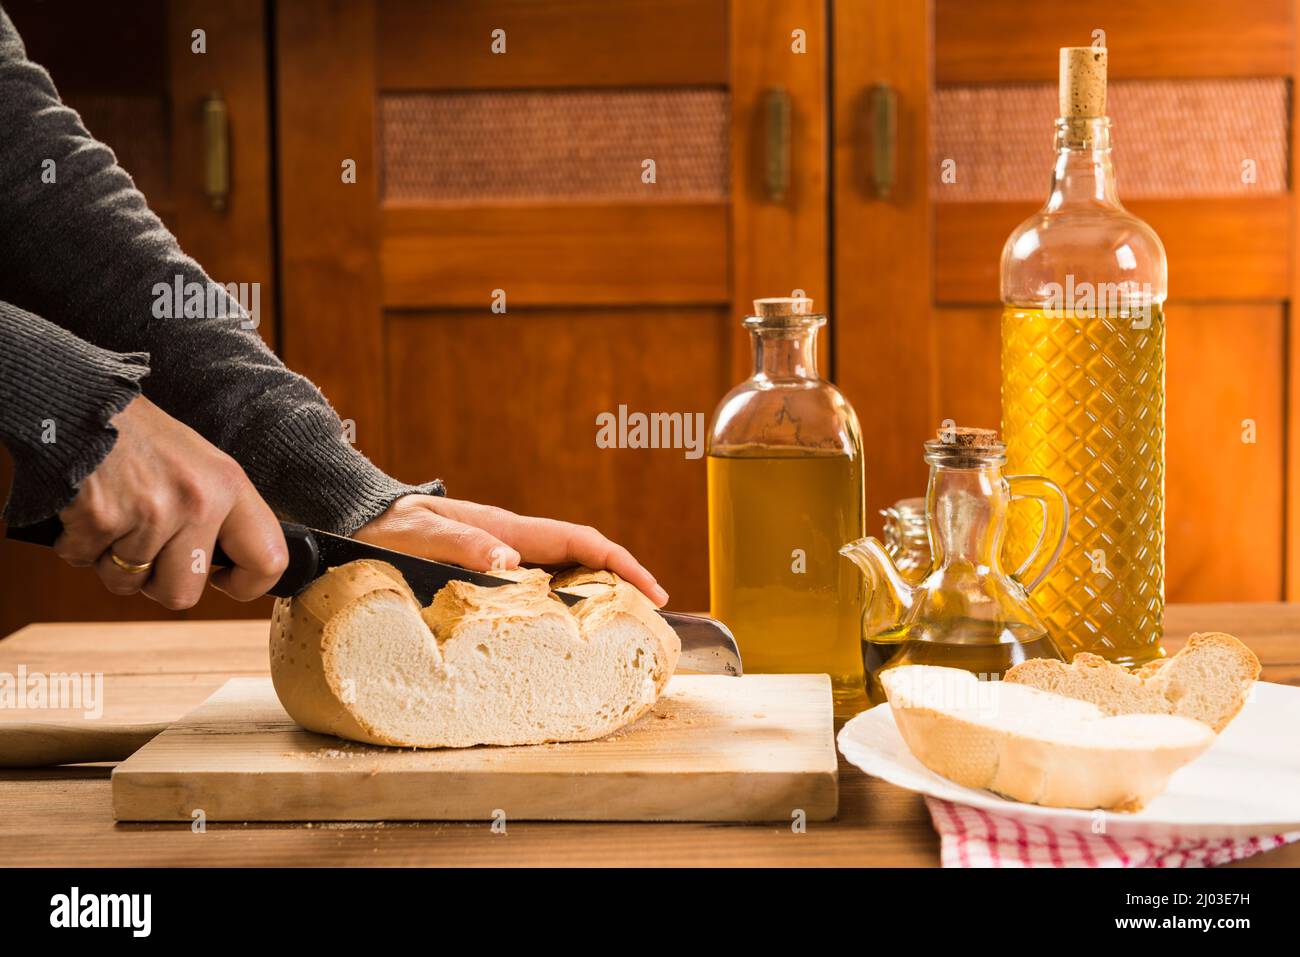 Detail of hands with a knife cutting a slice of bread on a wooden board, next to extra virgin olive oil in several bottles and glass containers, on a Stock Photo